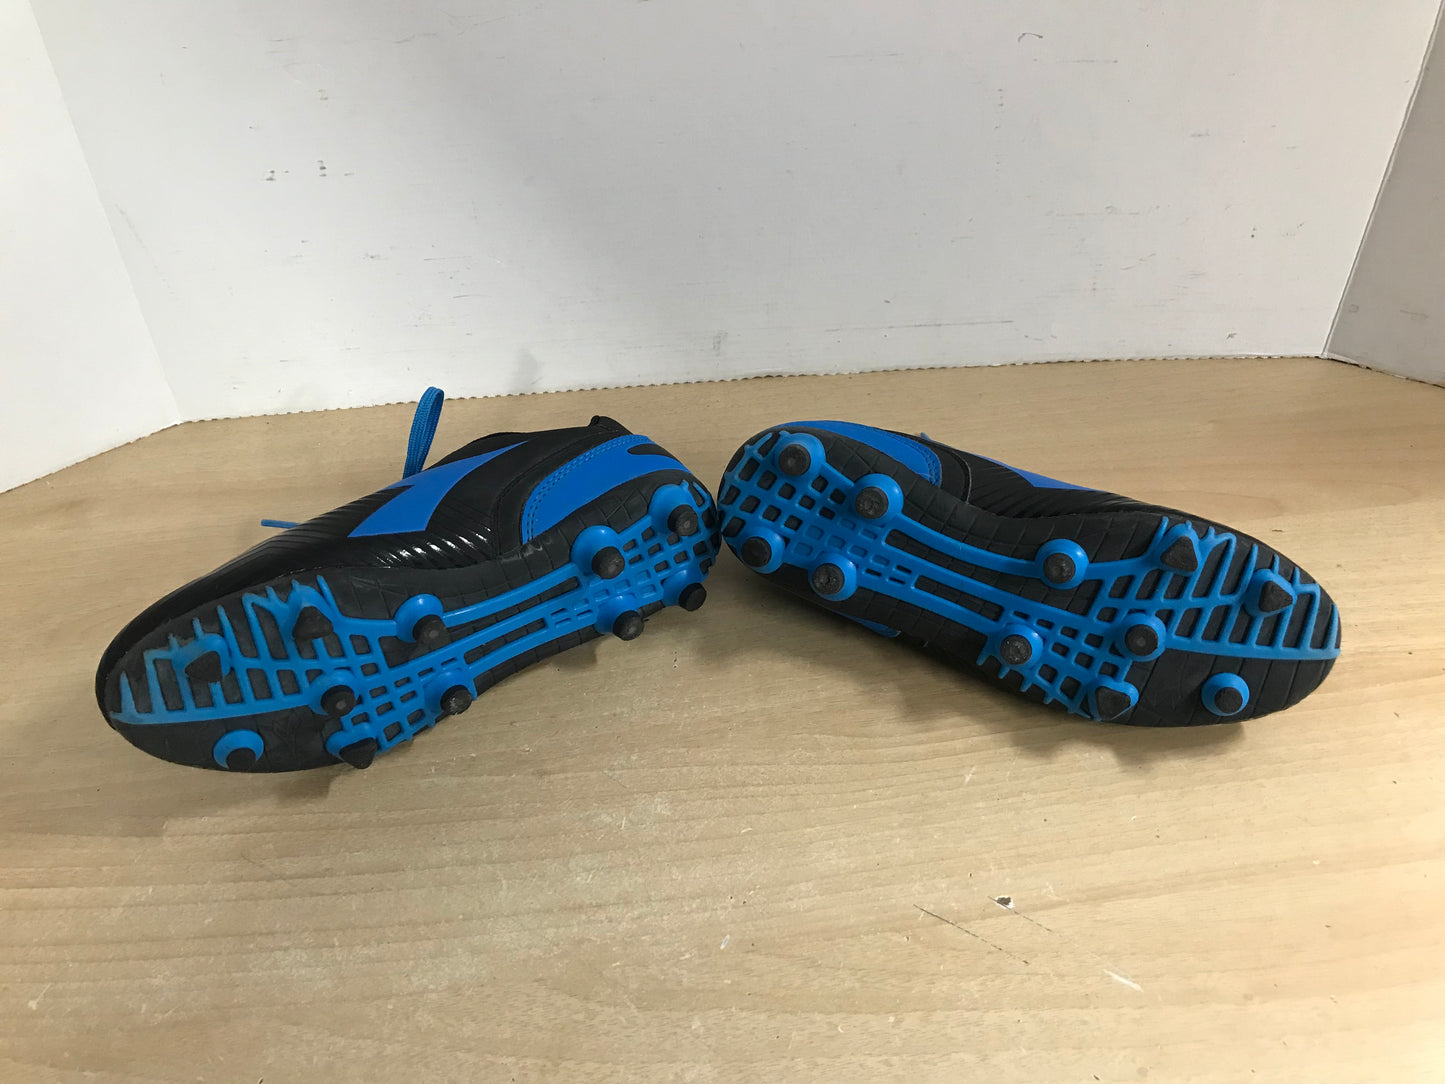 Soccer Shoes Cleats Child Size 4 Diadora Black Blue As New